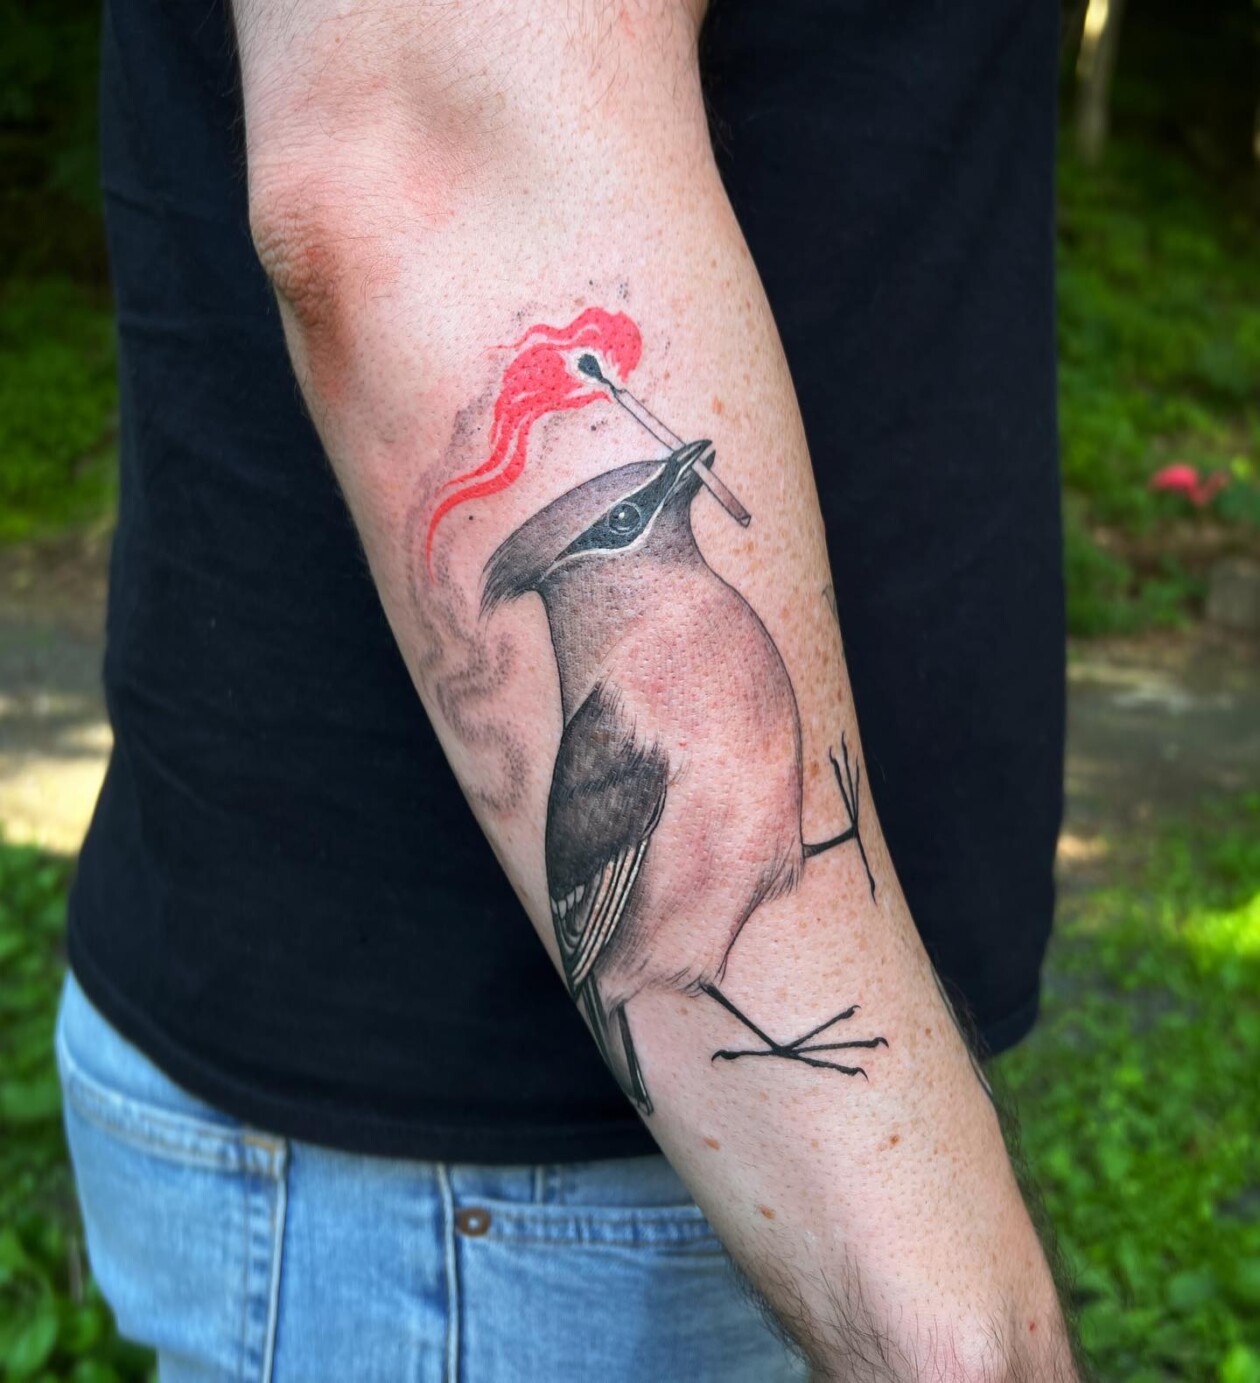 Stephanie Brown Creates Whimsical Tattoos Of Birds Holding A Lit Match Symbolizing Hope For A Better Future (11)